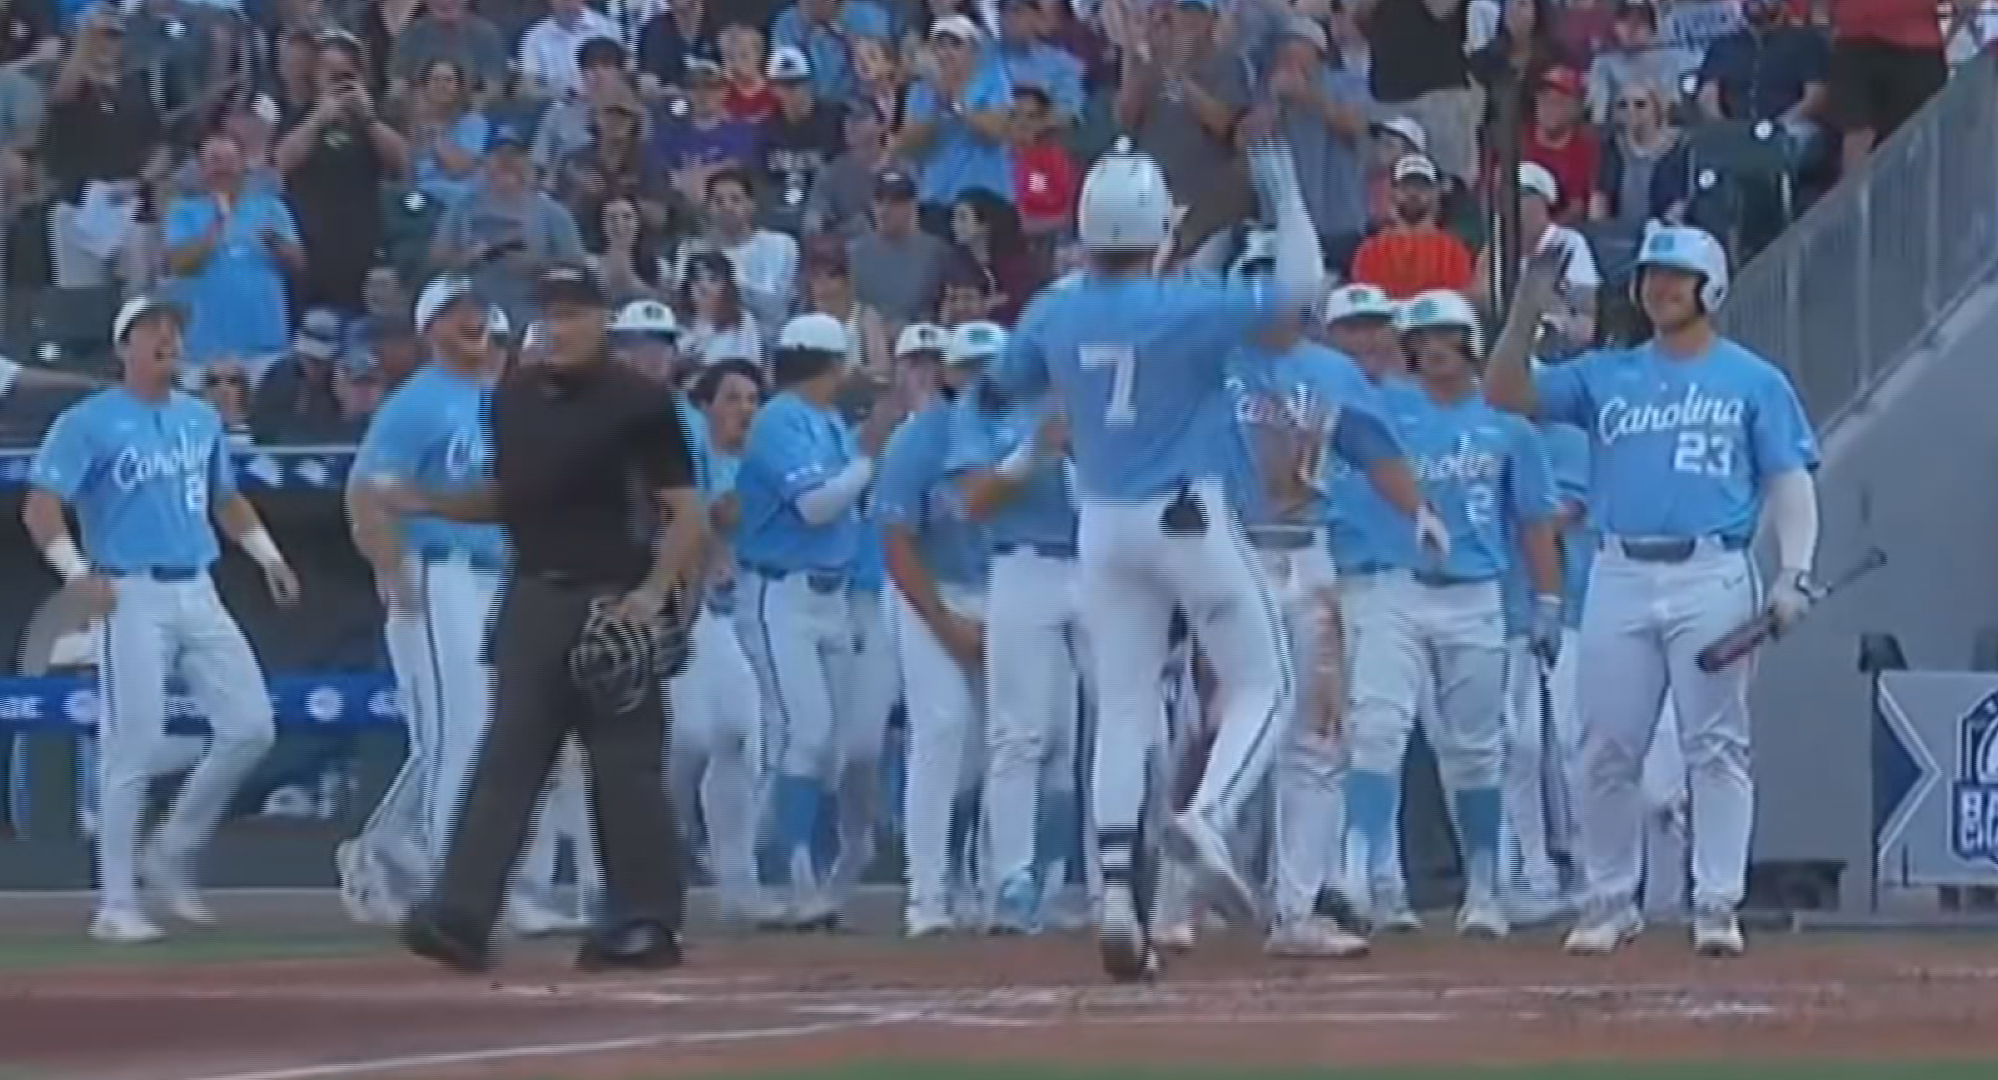 UNC, NC State face off in ACC baseball tournament in Charlotte